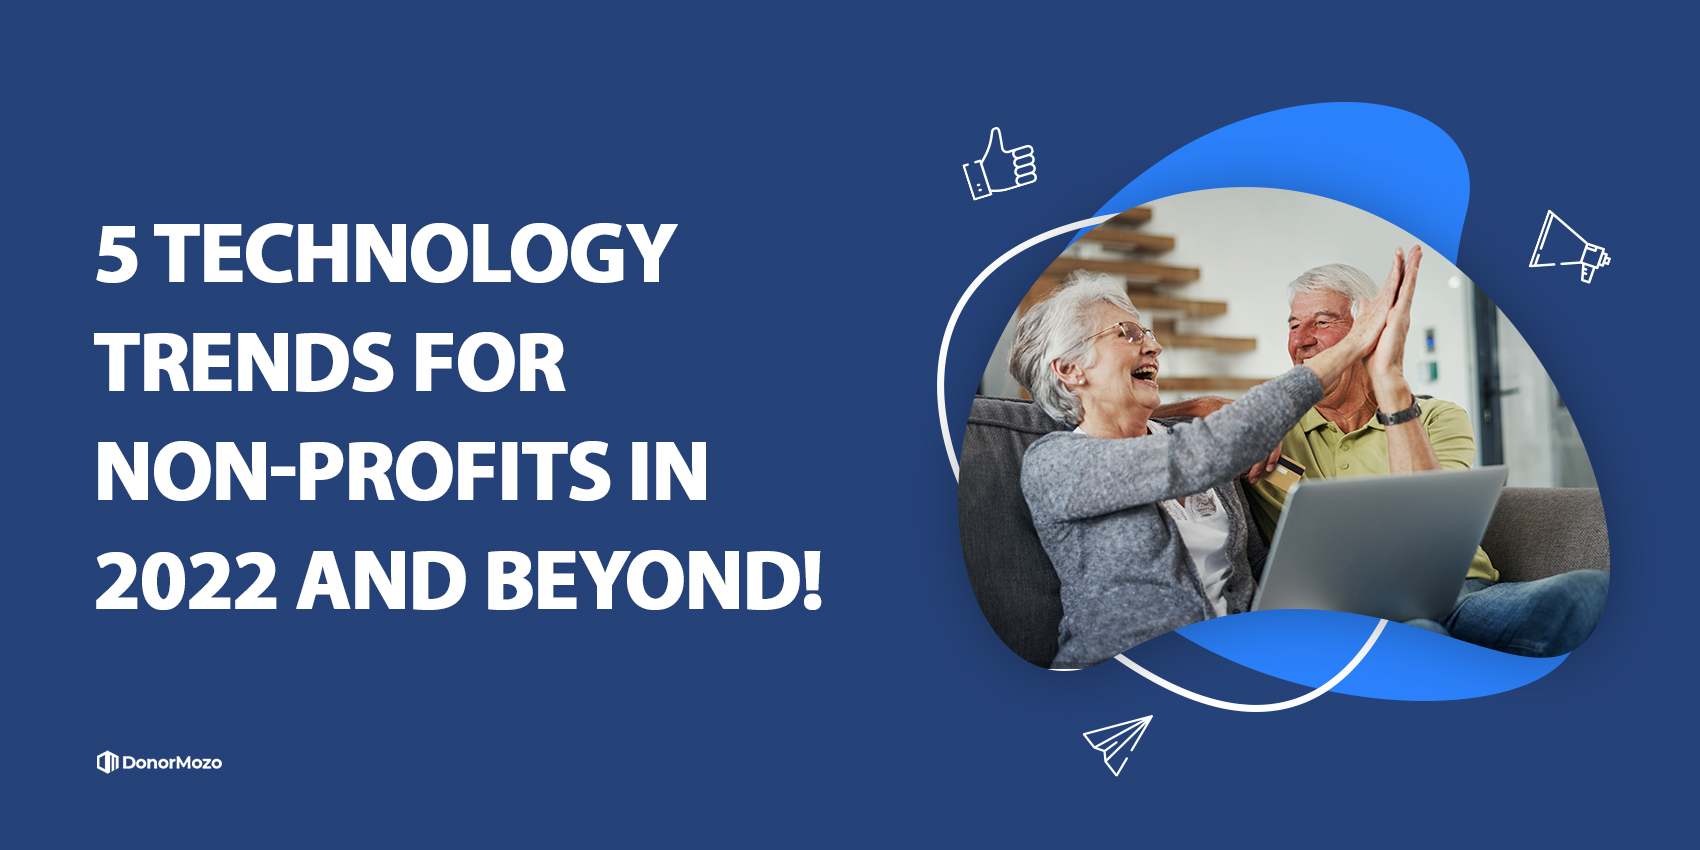 5 Technology Trends for Non-Profits in 2022 and Beyond!